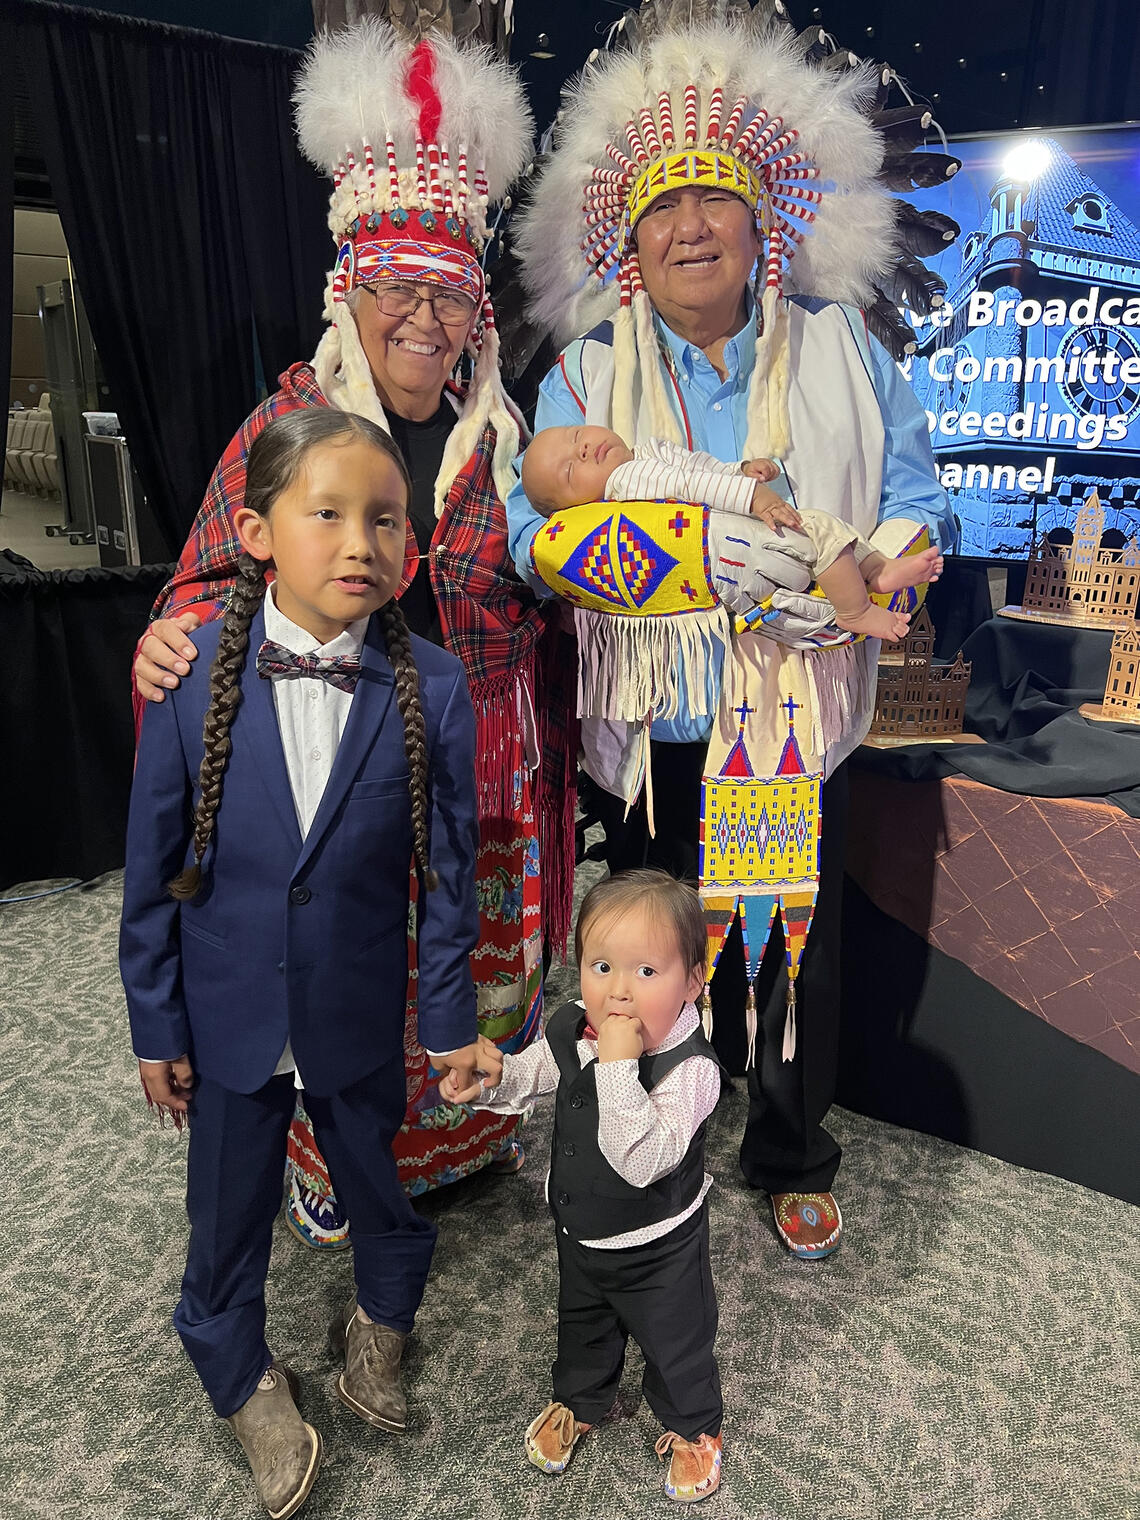 Reg and Rose Crowshoe, Traditional Knowledge Keepers from Piikani First Nation, are awarded for their commitment to increasing cultural capacity within Calgary.